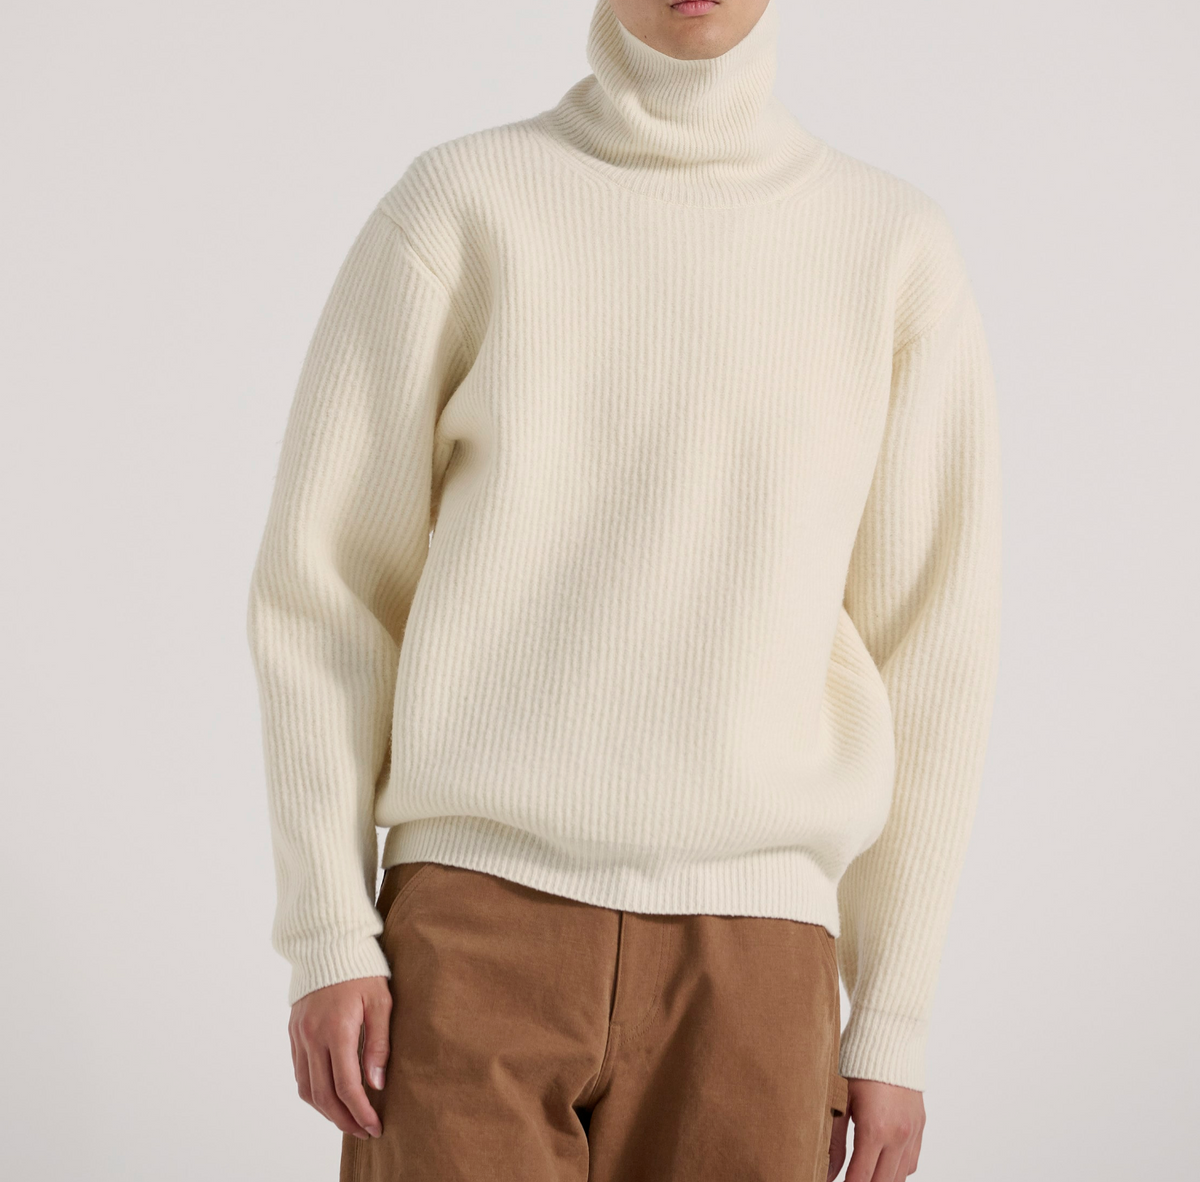 AURALEE MILLED FRENCH MERINO RIB KNIT 3 | camillevieraservices.com